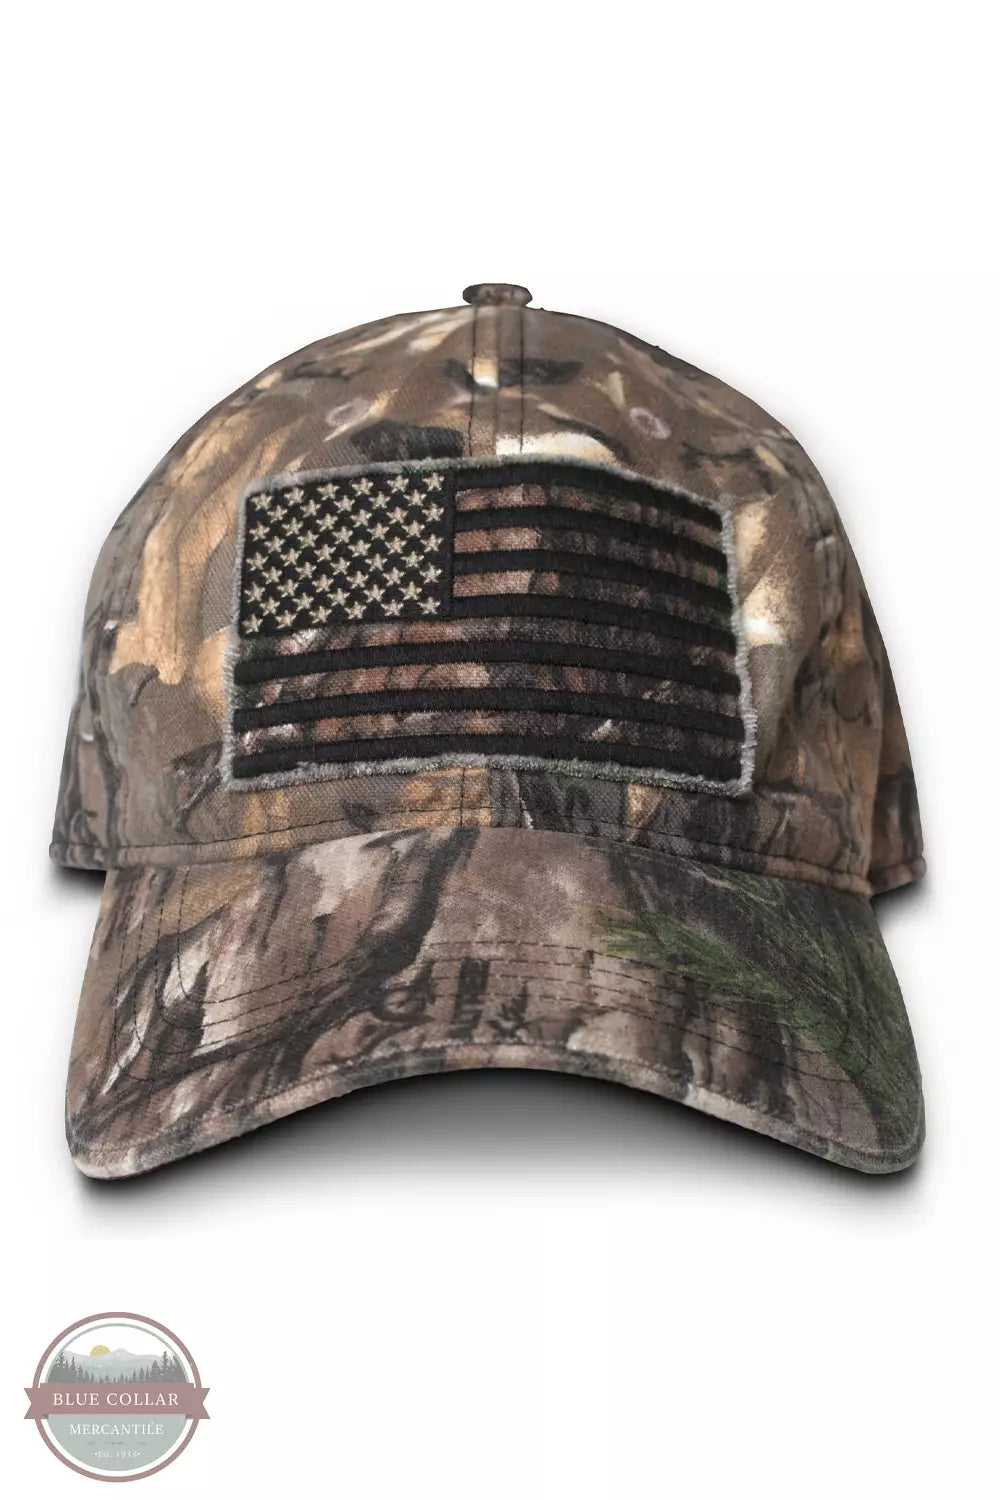 Buckwear 9061 Smooth Operator Hat Front View